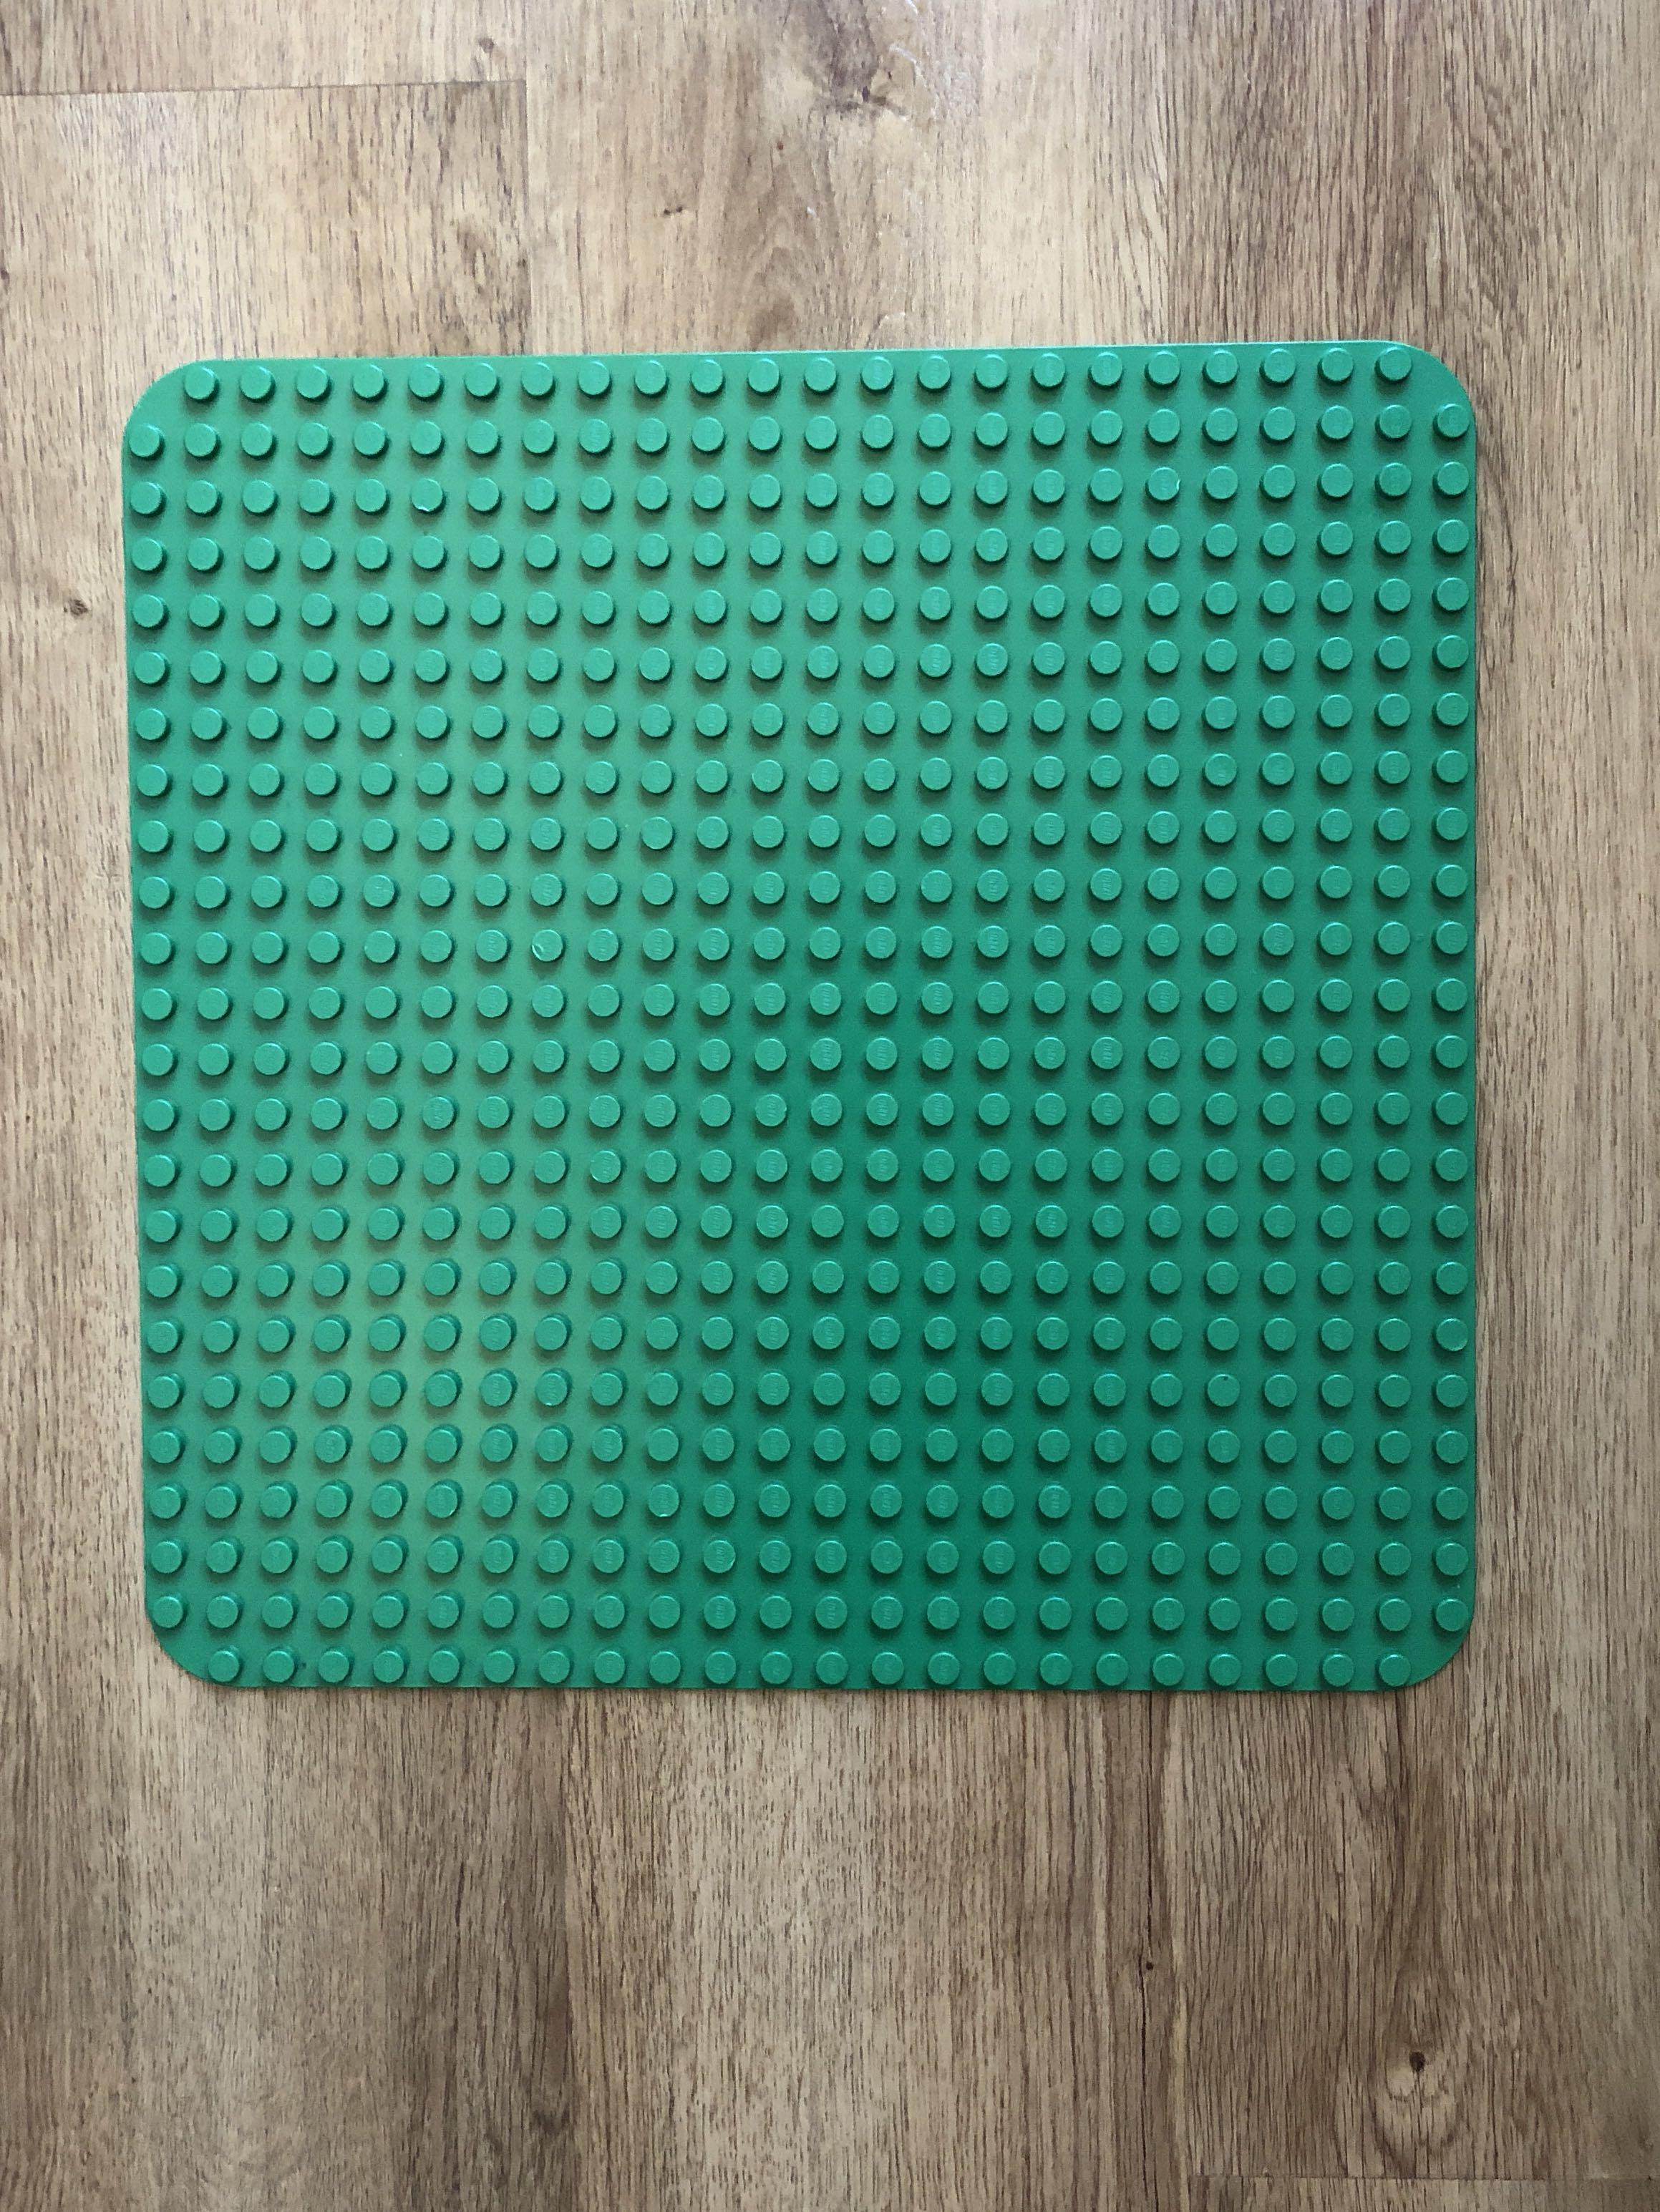 duplo large green building plate